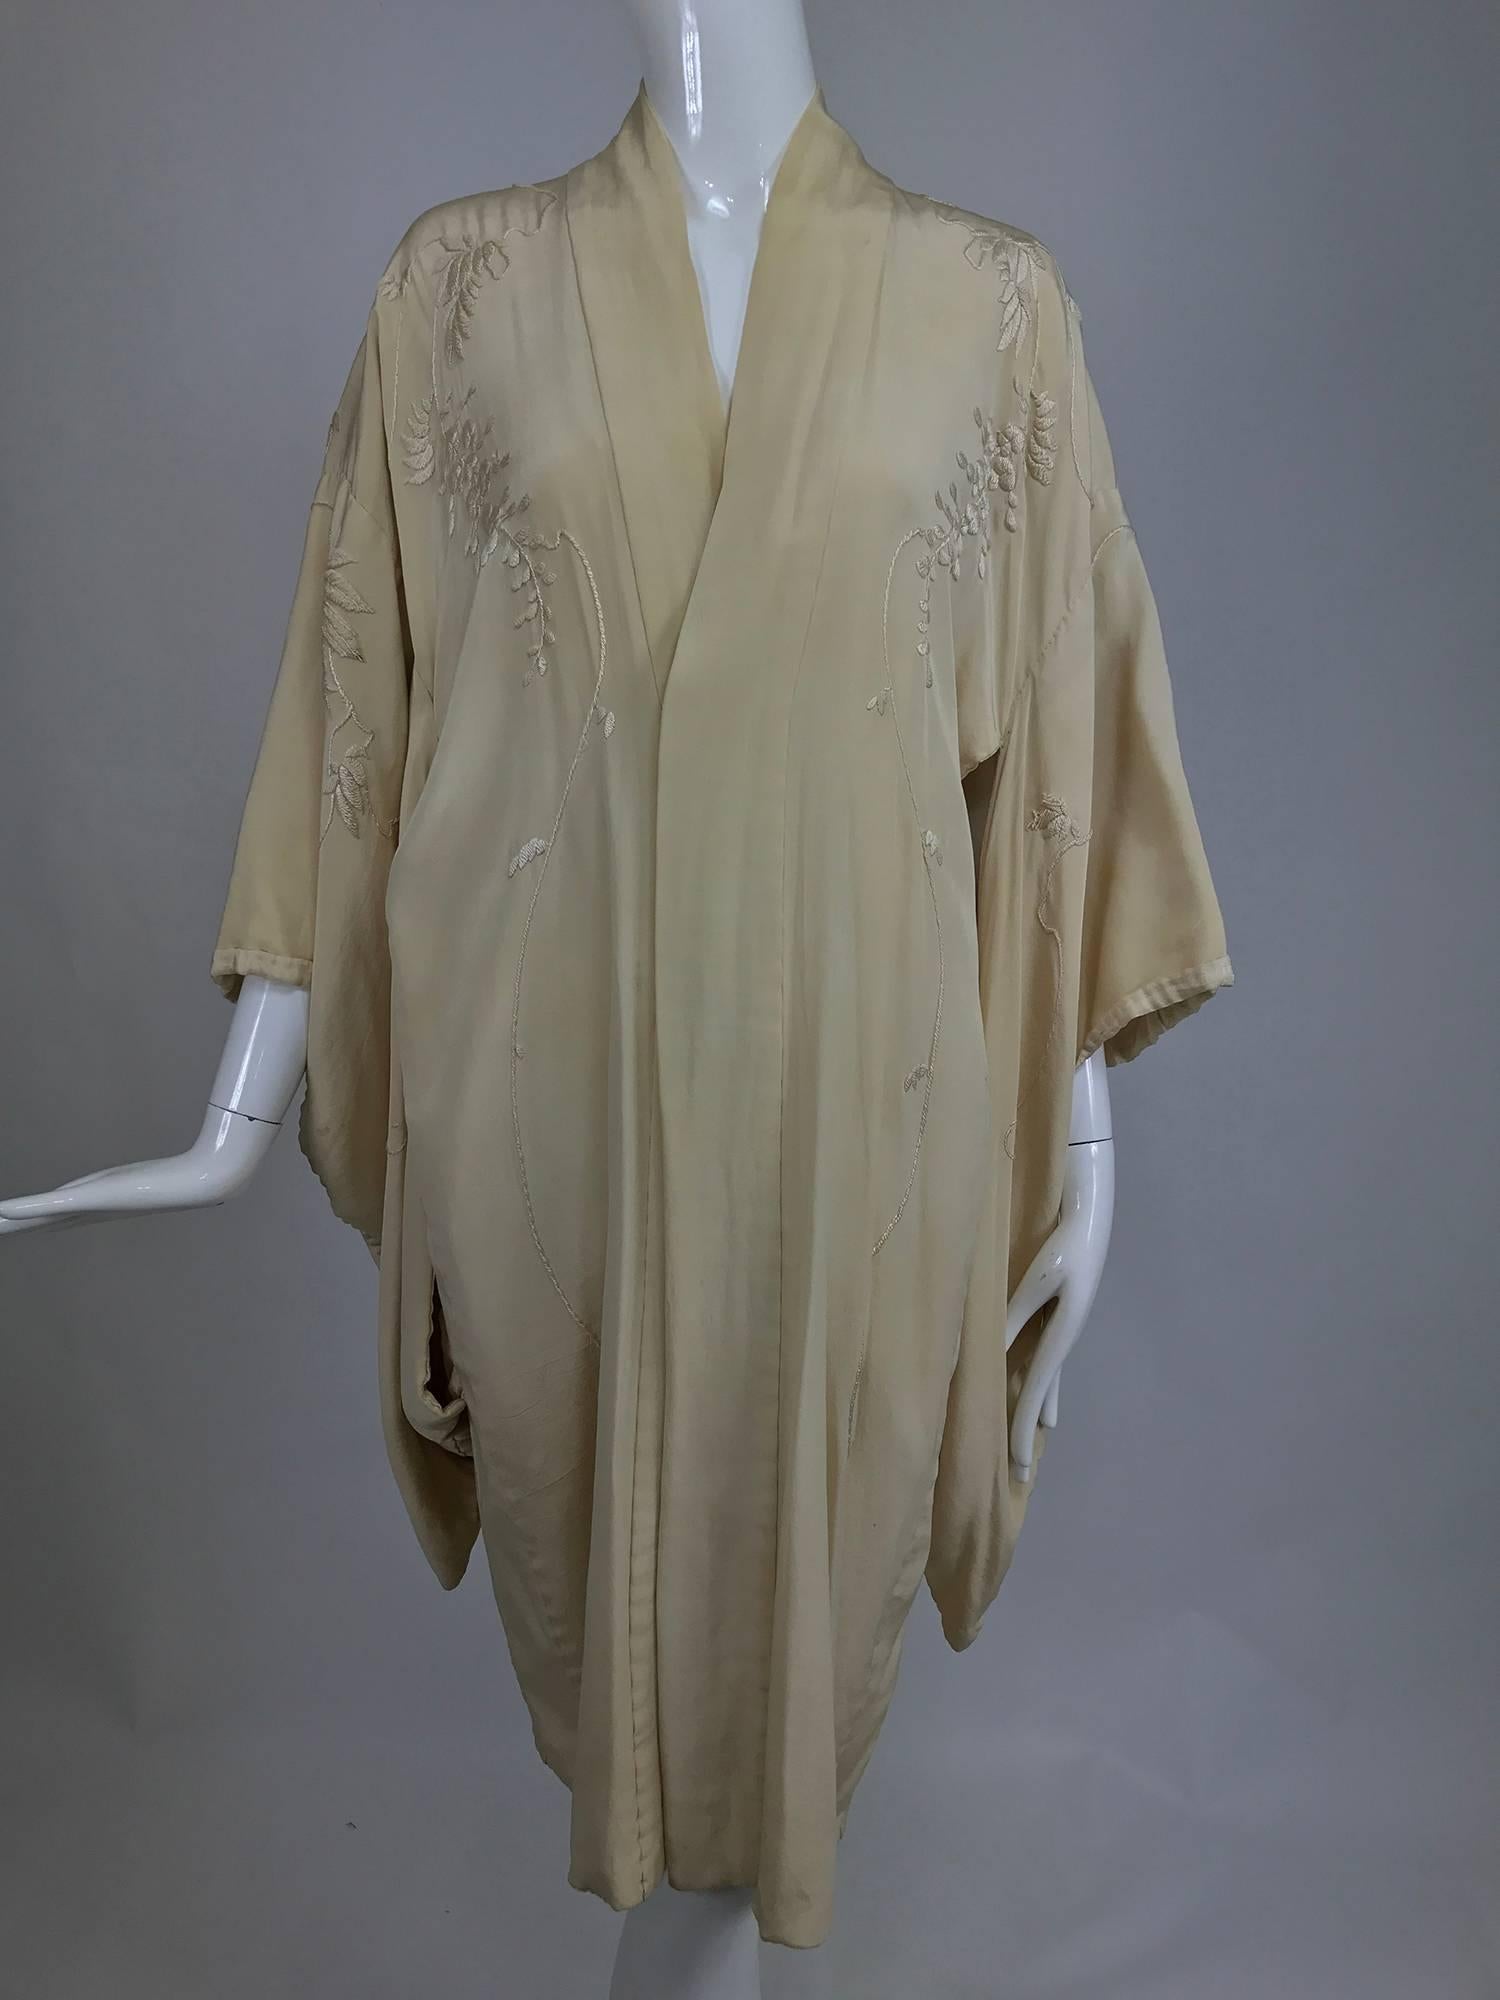 Romantic wisteria embroidered cream silk short kimono from the 1920s, this beautiful piece is lined in lightweight cream silk brocade with a floral pattern...Lush satin stitch embroidery of cascading wisteria...Deep kimono sleeves, this piece is